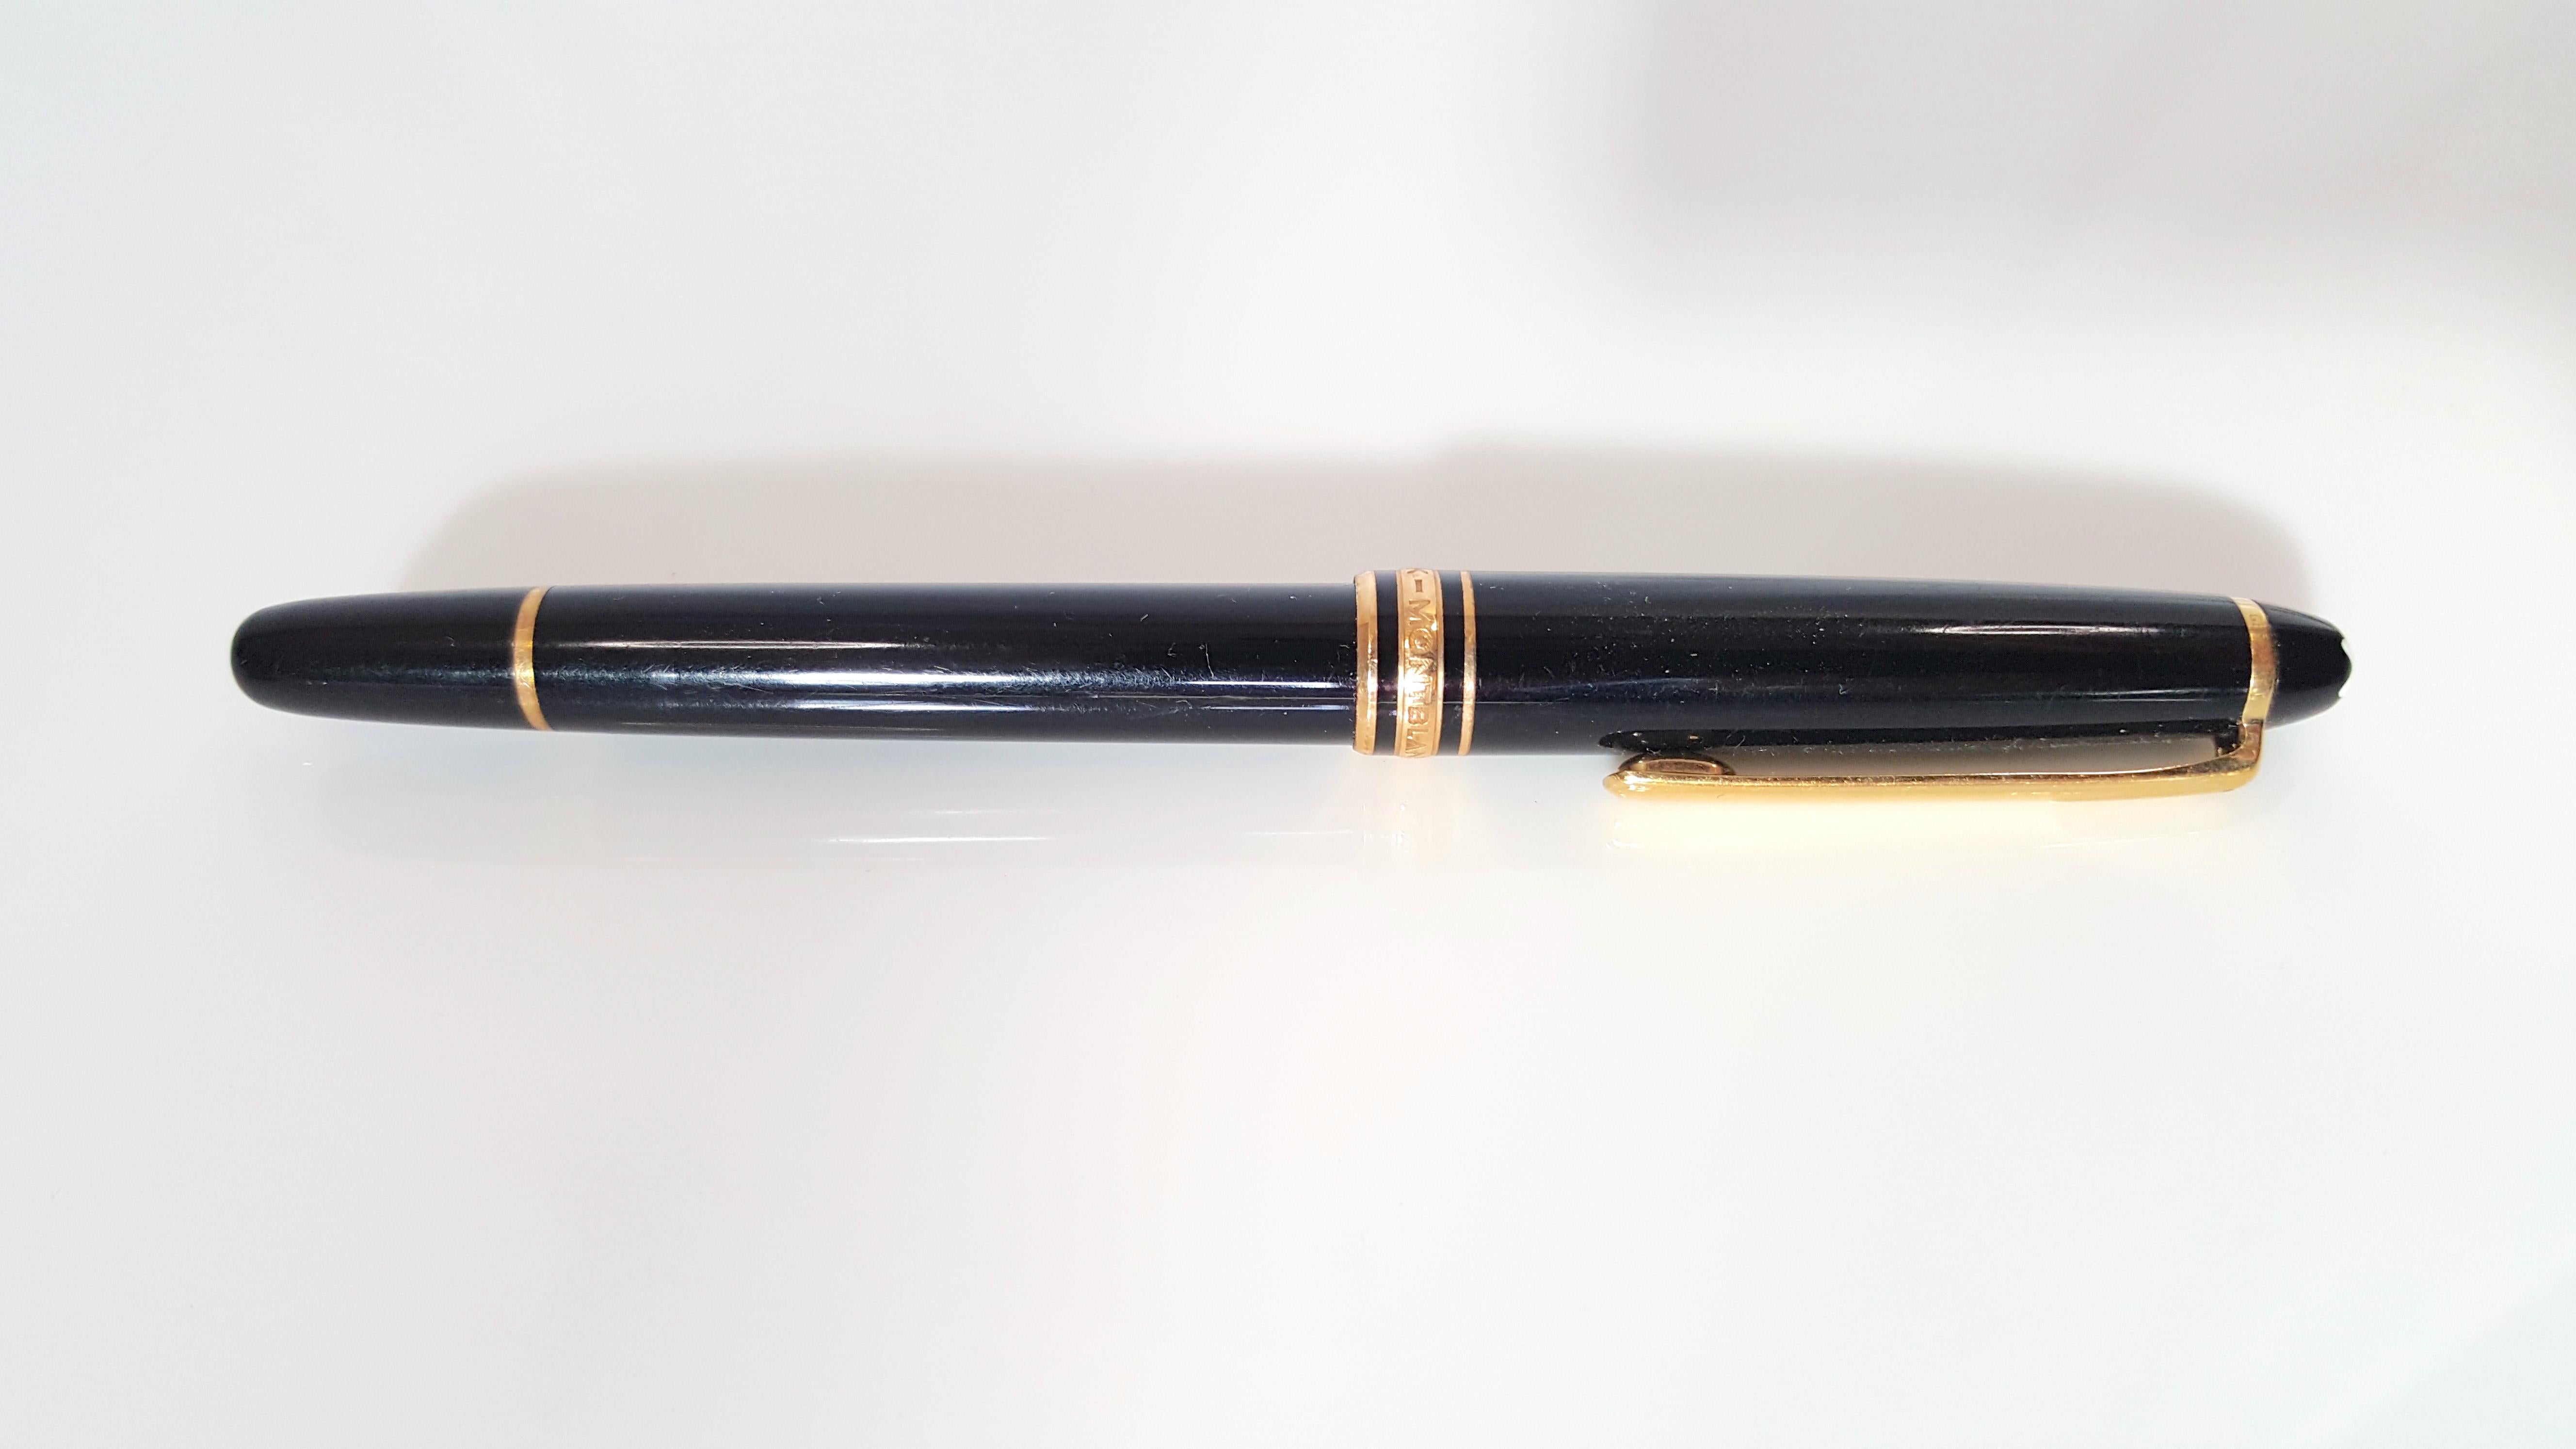 The best-known writing instrument of all Montblanc collections, this Meisterstuck Classique features six gilt rings and clip on the black-resin rollerball pen with a pull-off cap, unique serial number, embossed center-ring, and inlaid white-star